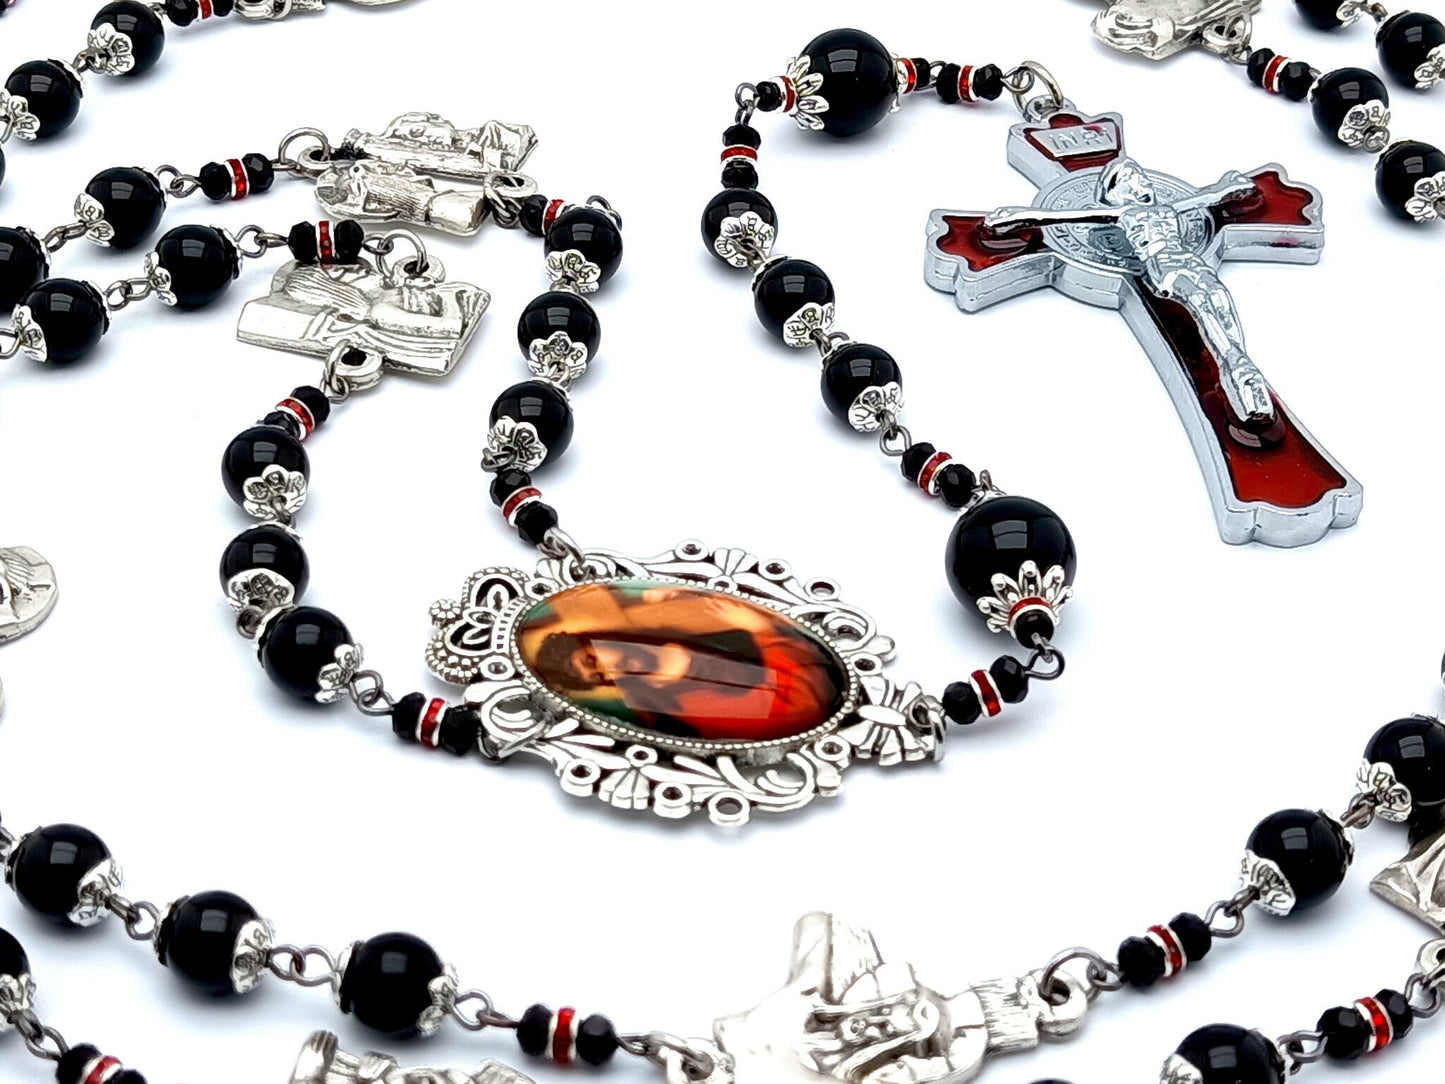 Stations of the Cross unique rosary beads onyx gemstone prayer chaplet with red enamel Saint Benedict stainless steel crucifix.